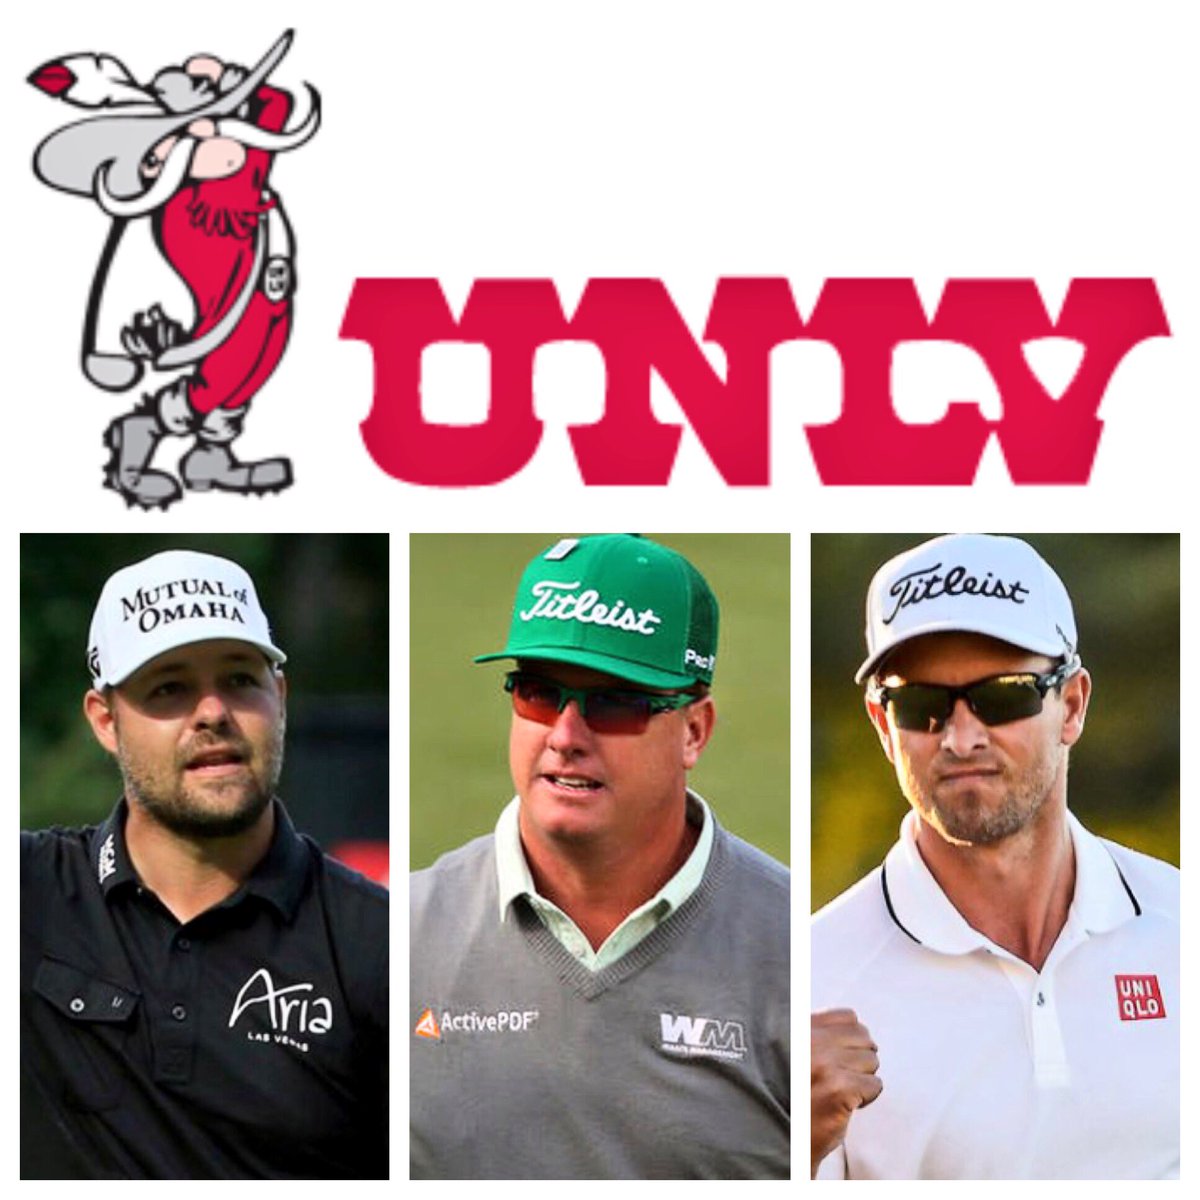 Congrats guys 🙌!  Great week for #UNLV #Rebels at @theopen!  @ryanmoorepga finished T12, and @hoffman_charley and #AdamScott finished T17!  #RebsOnTour #TheOpen #CantWaitForThePGA